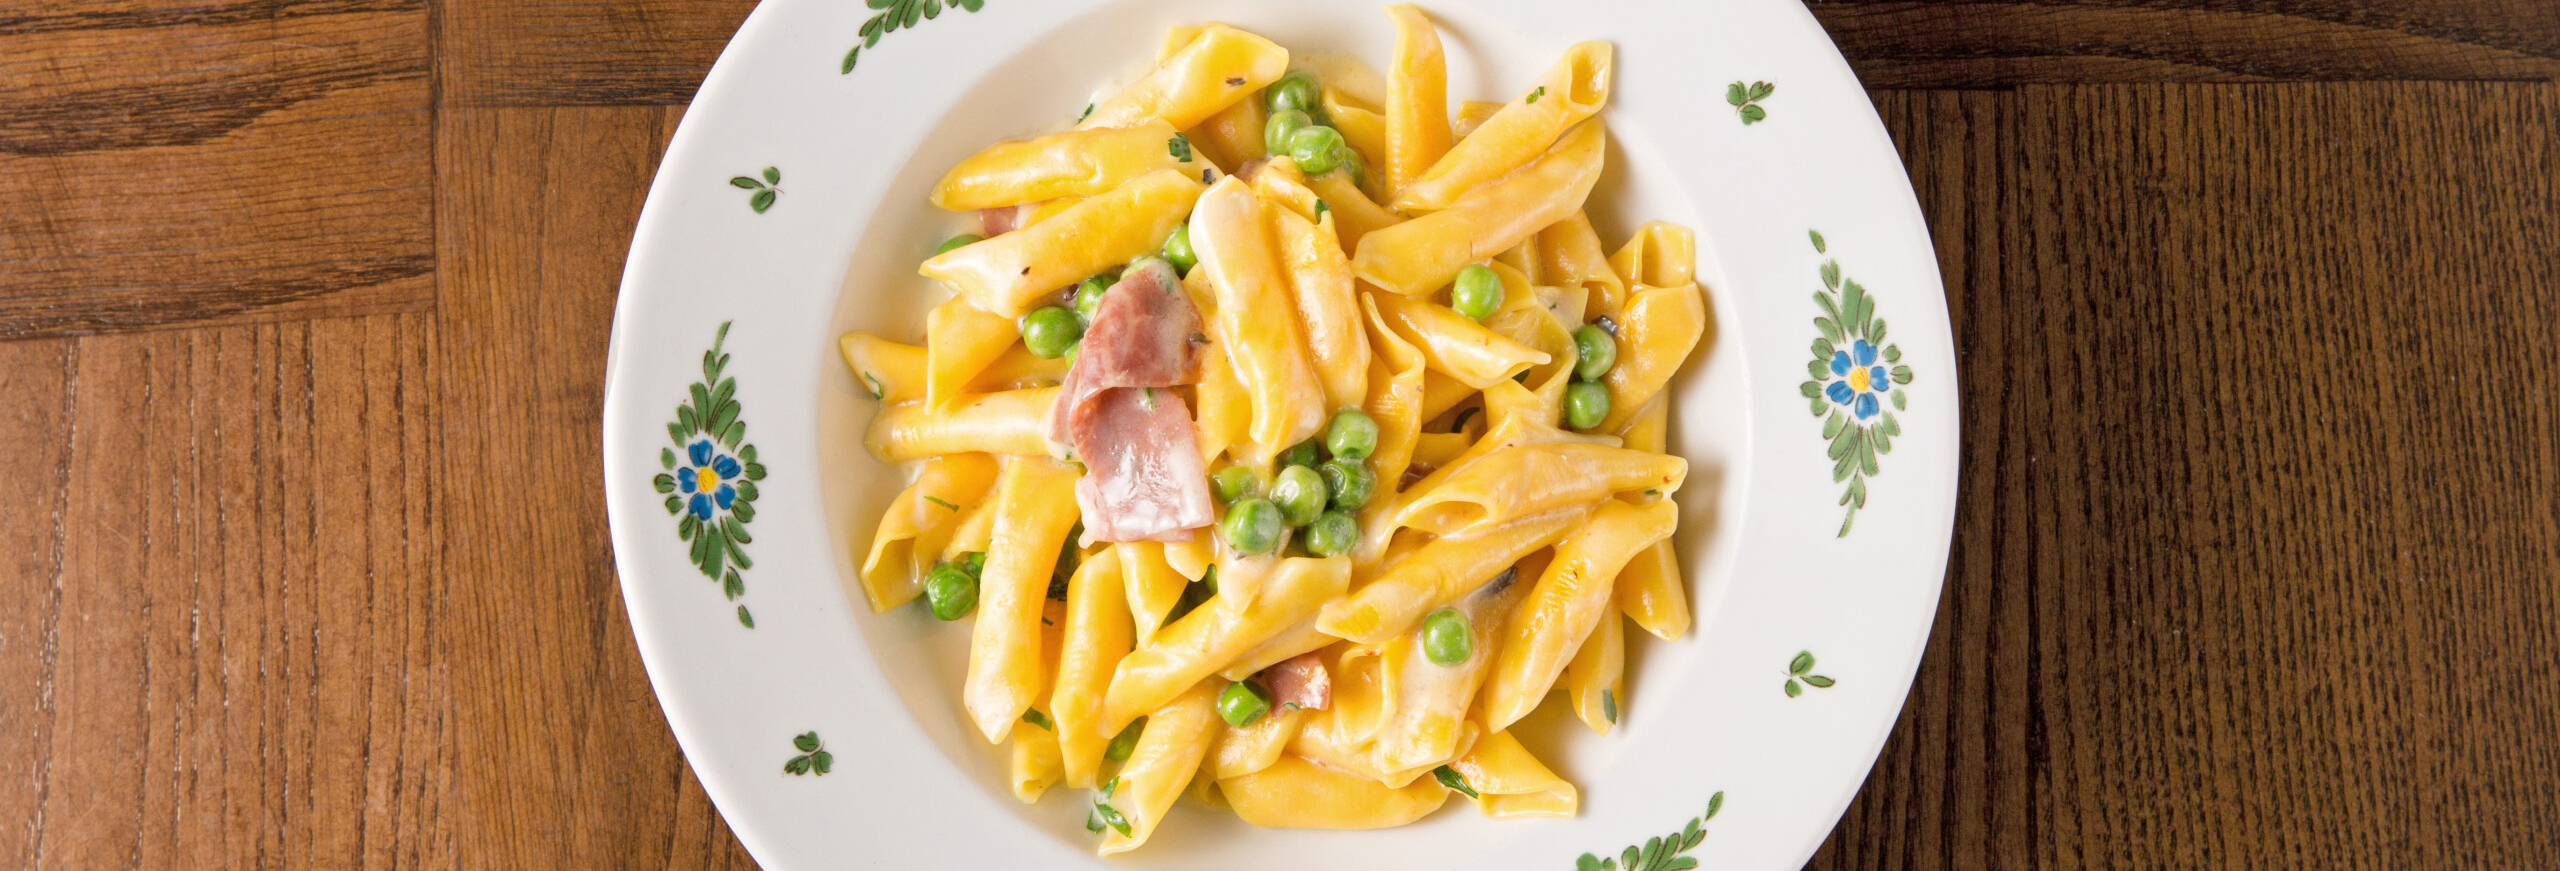 garganelli pasta with peas and speck